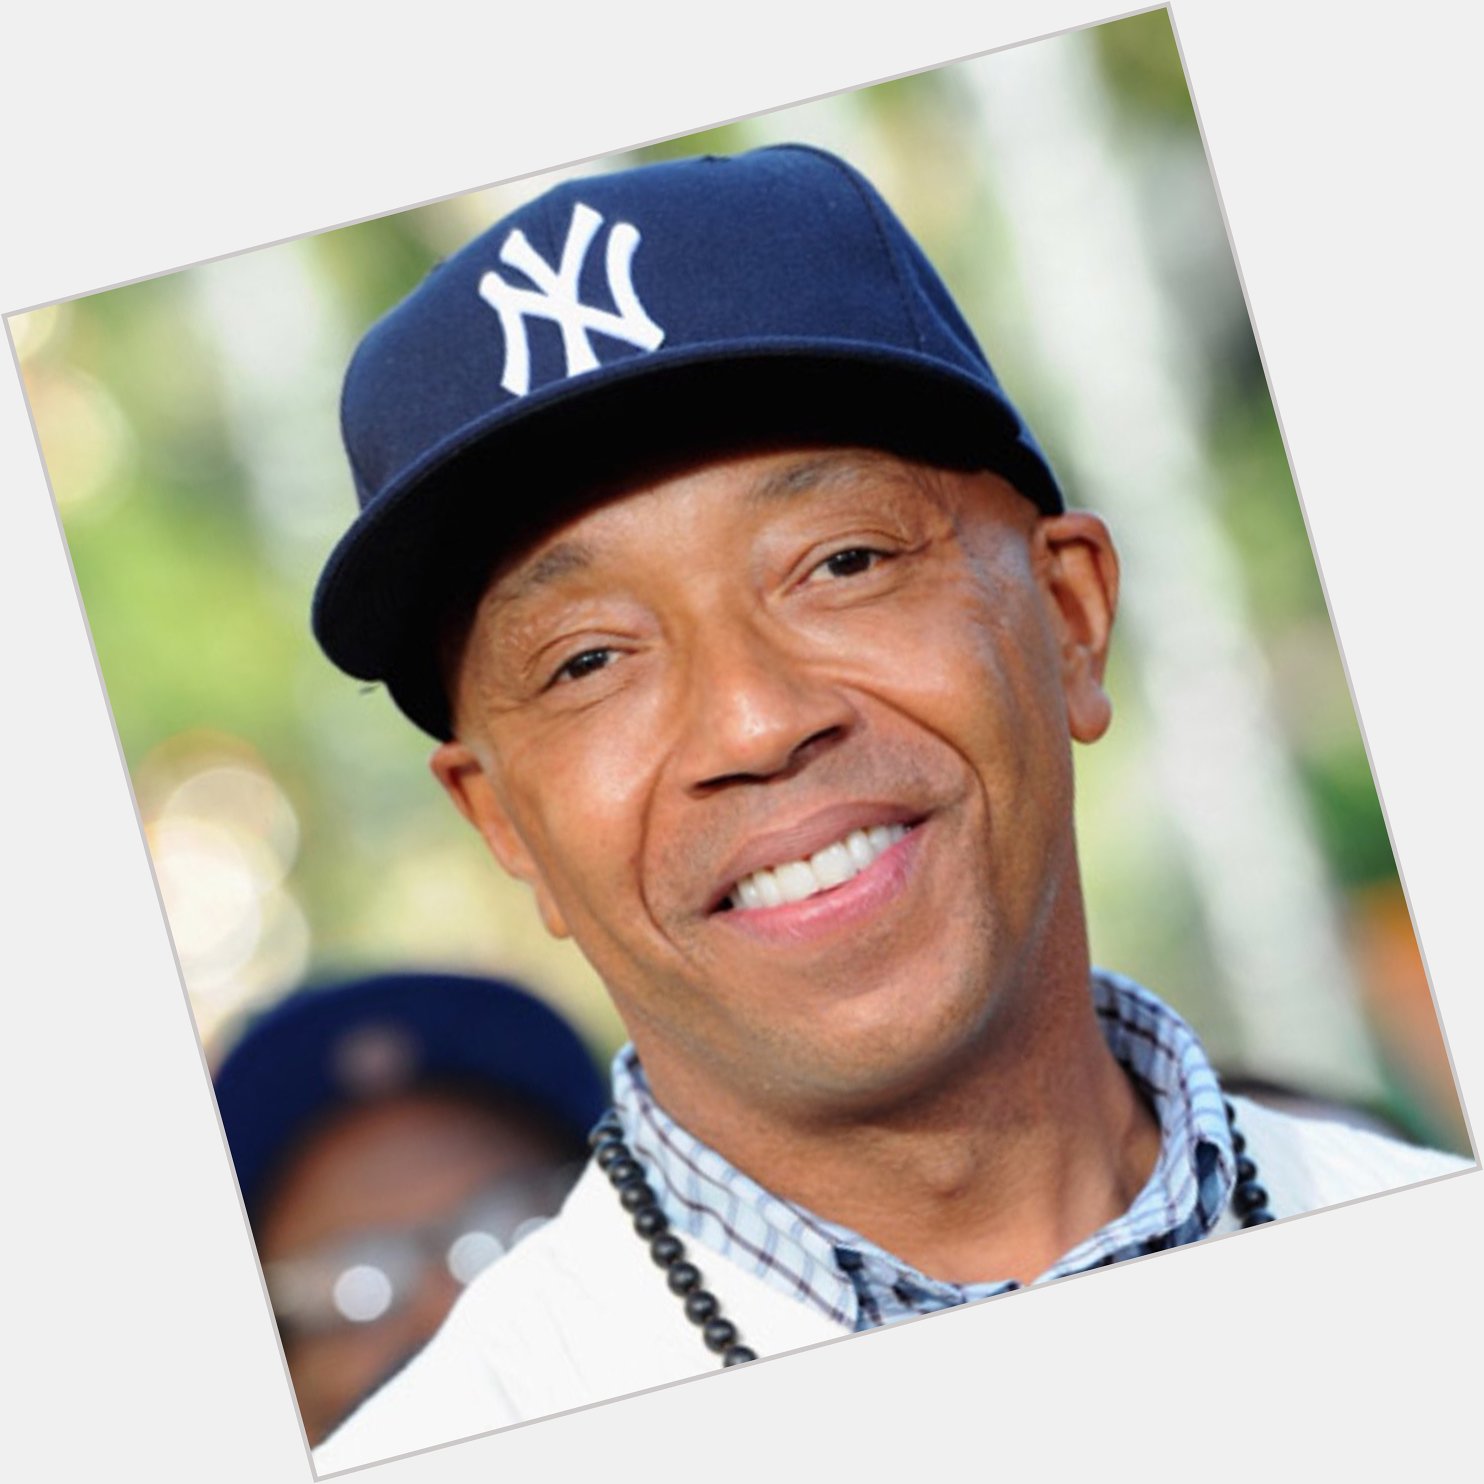  The person who stays focused on their dreams, realizes them. - Russell Simmons 

Happy 60th Birthday 